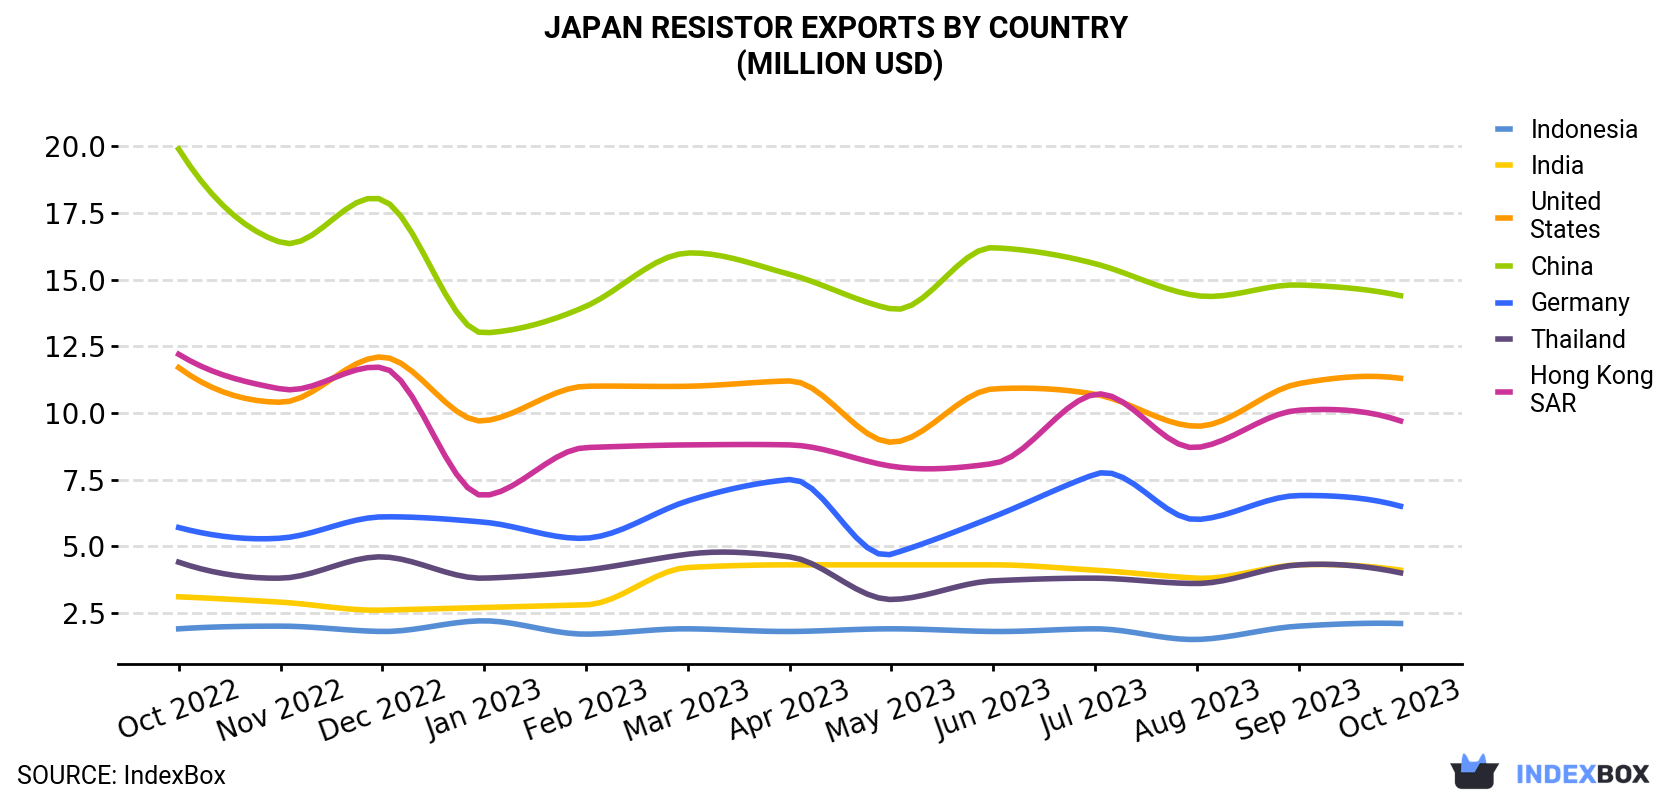 Japan Resistor Exports By Country (Million USD)